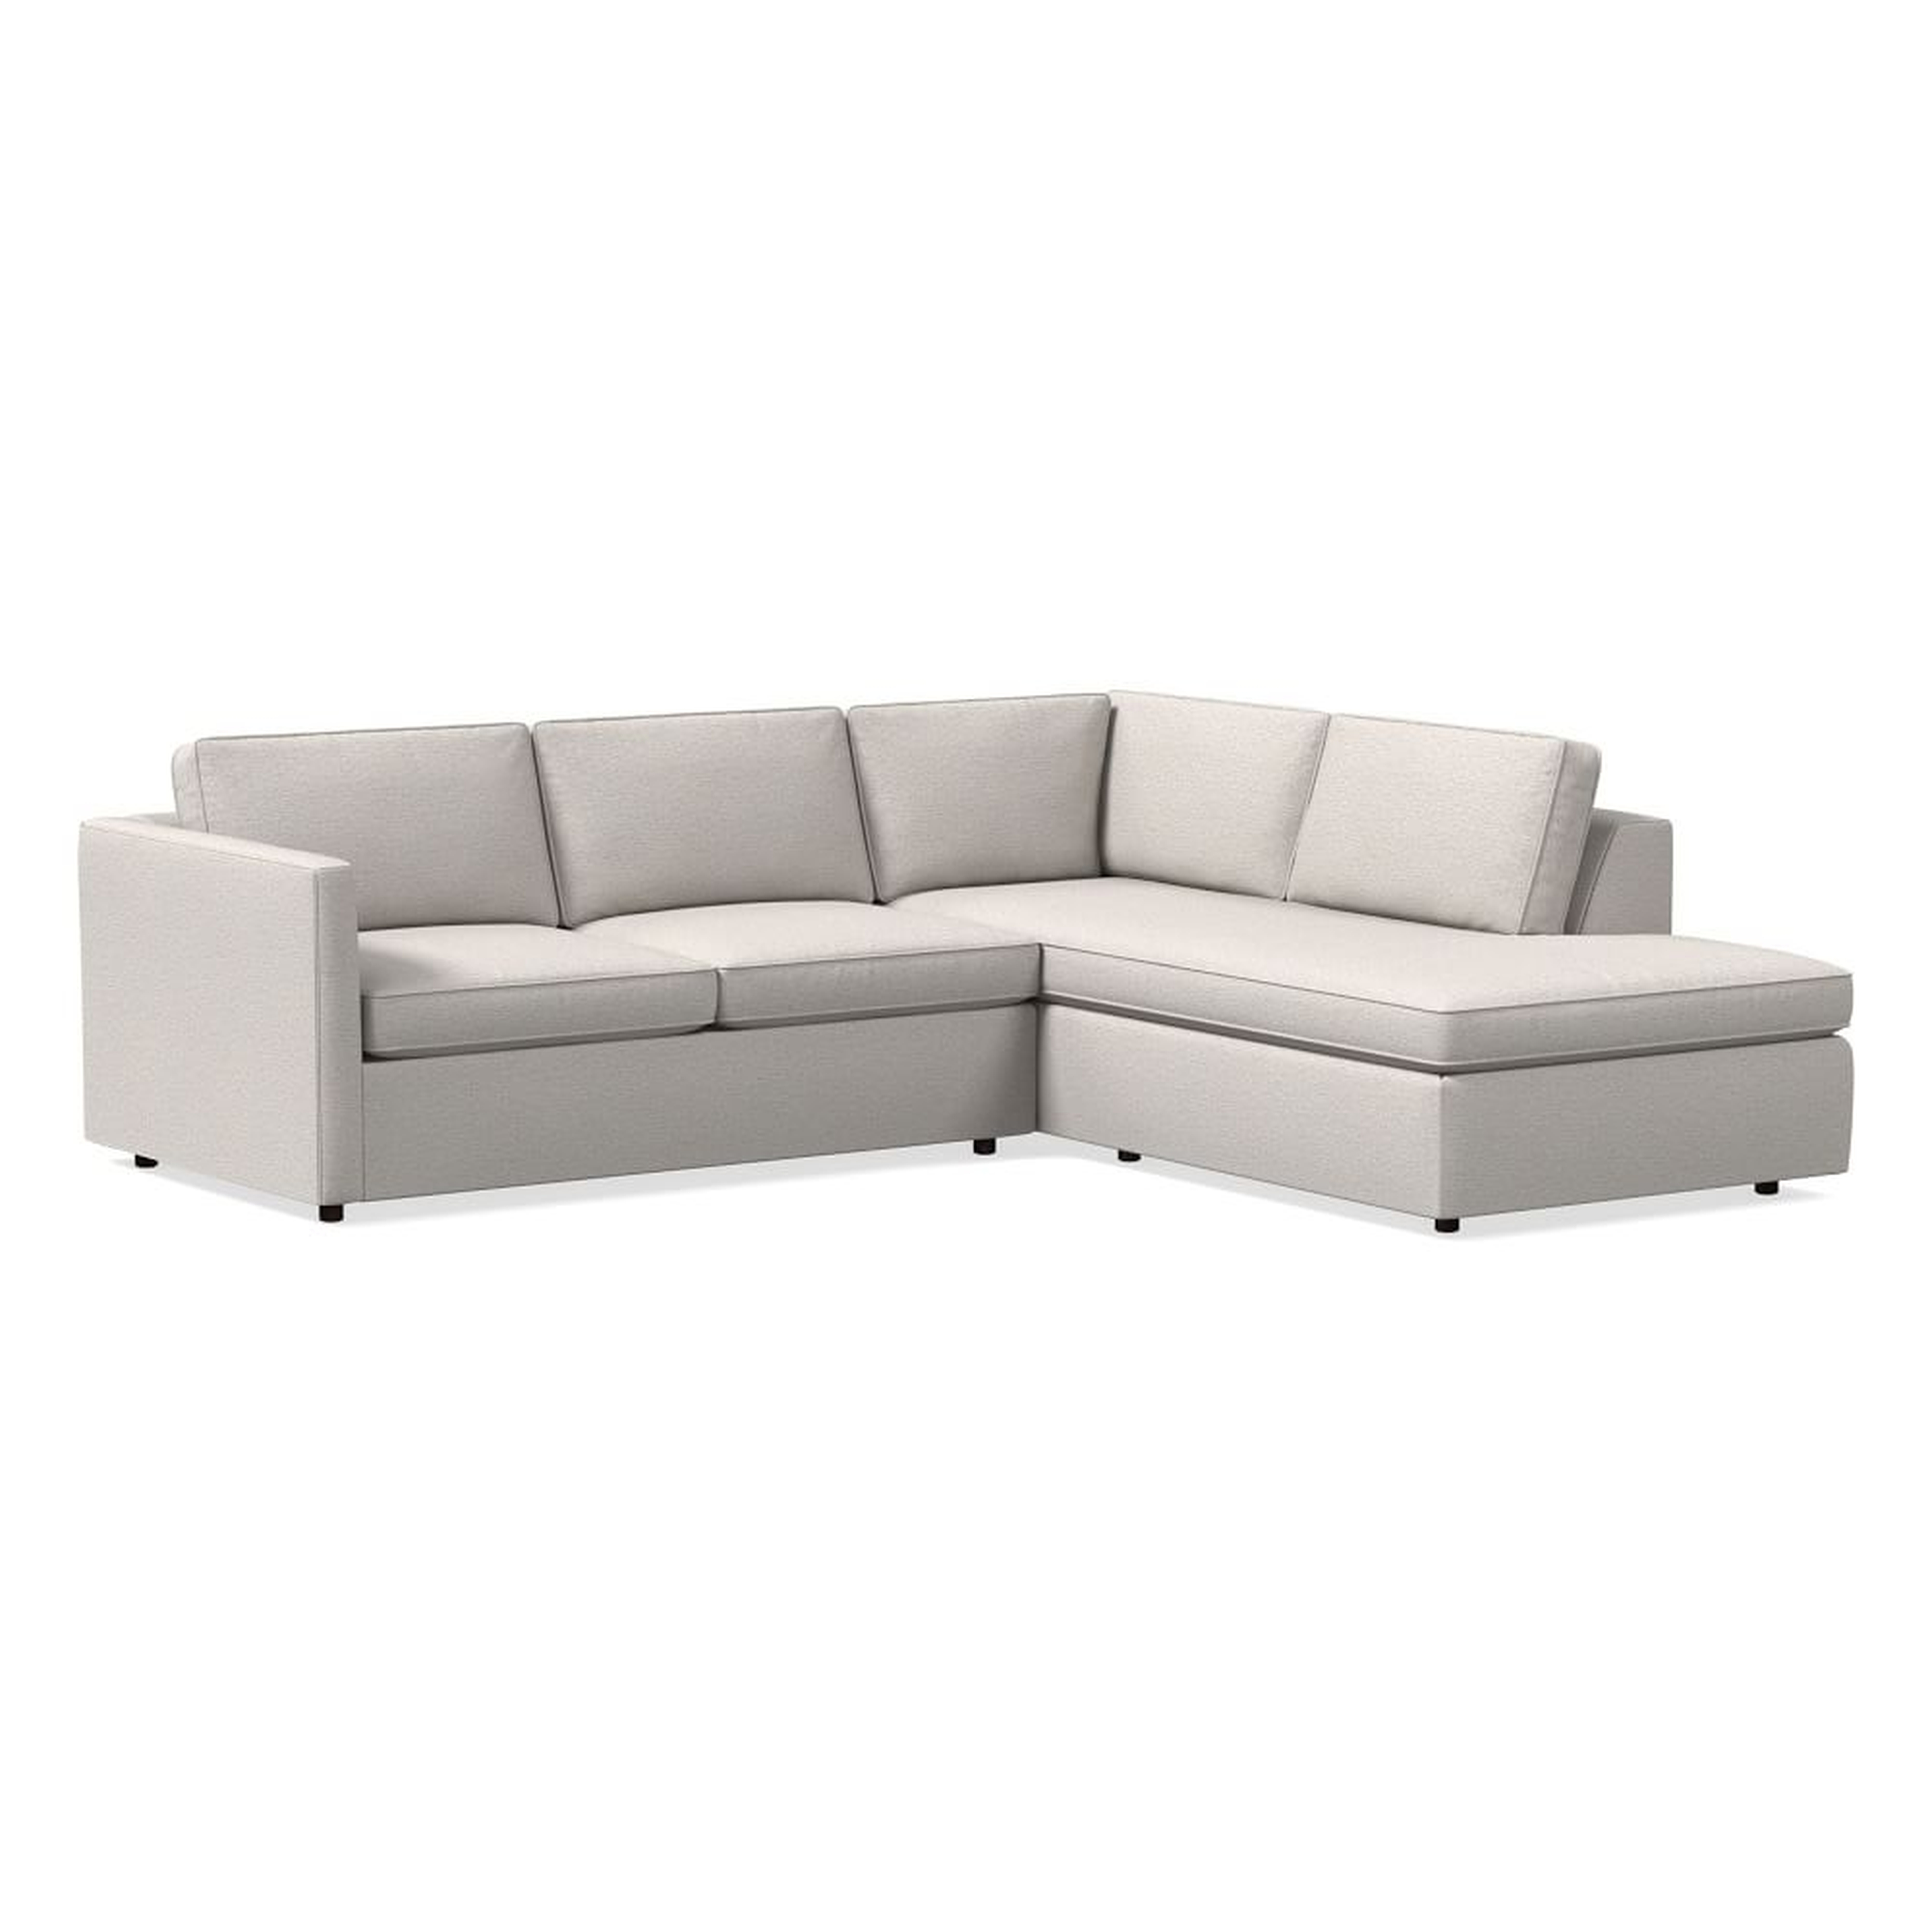 Harris 104" Right Multi Seat 2-Piece Bumper Chaise Sectional, Standard Depth, Twill, Sand - West Elm